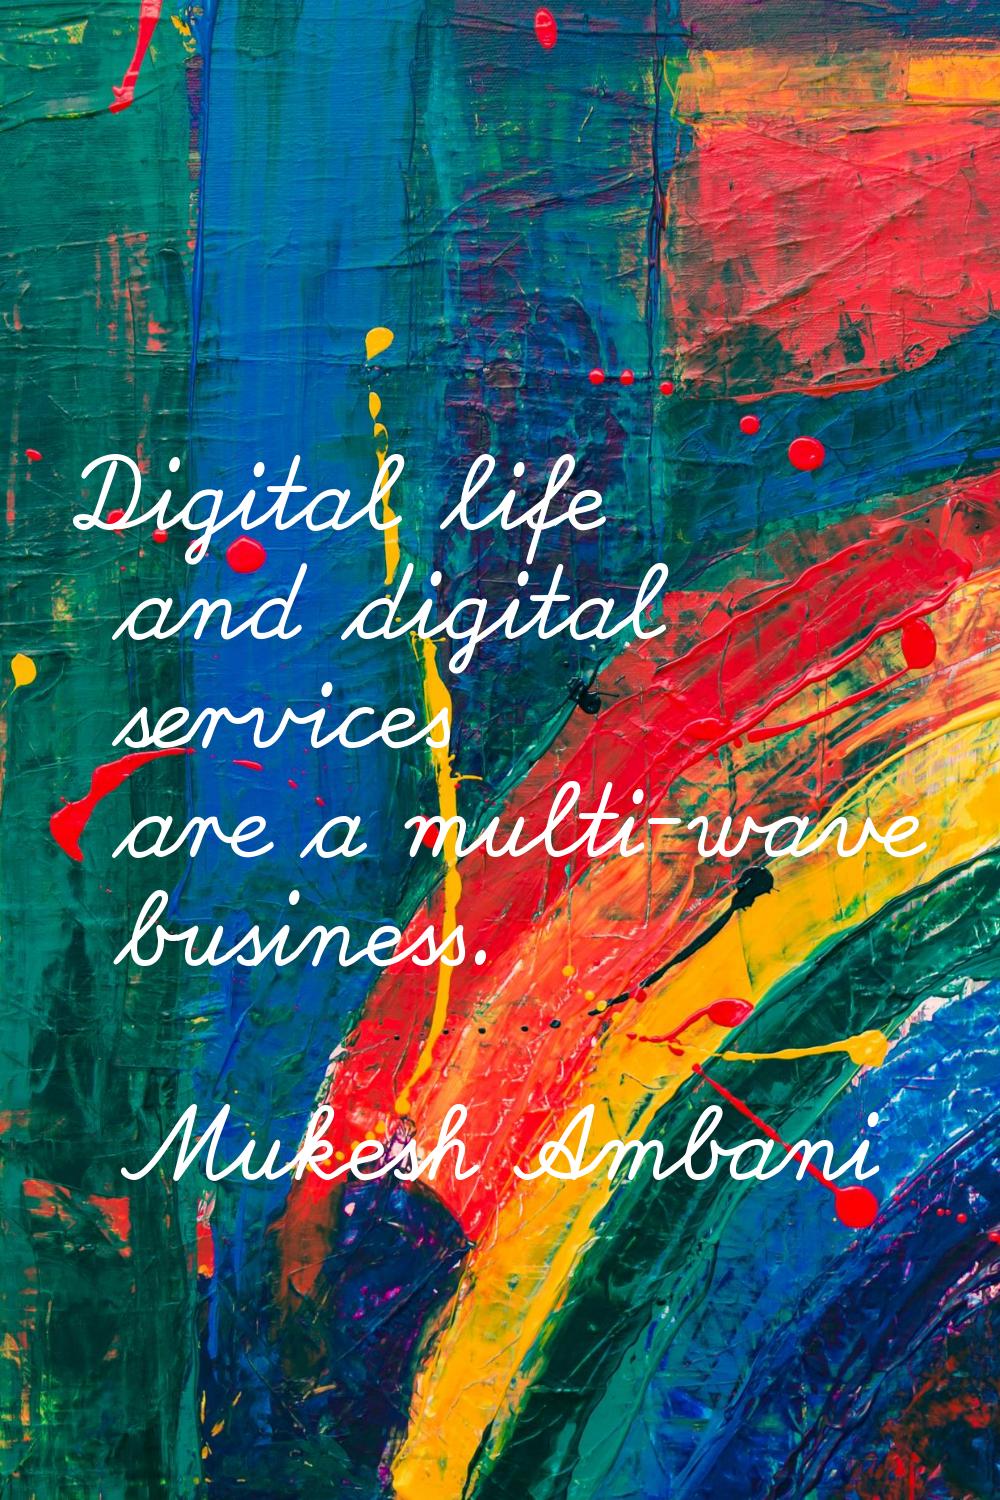 Digital life and digital services are a multi-wave business.